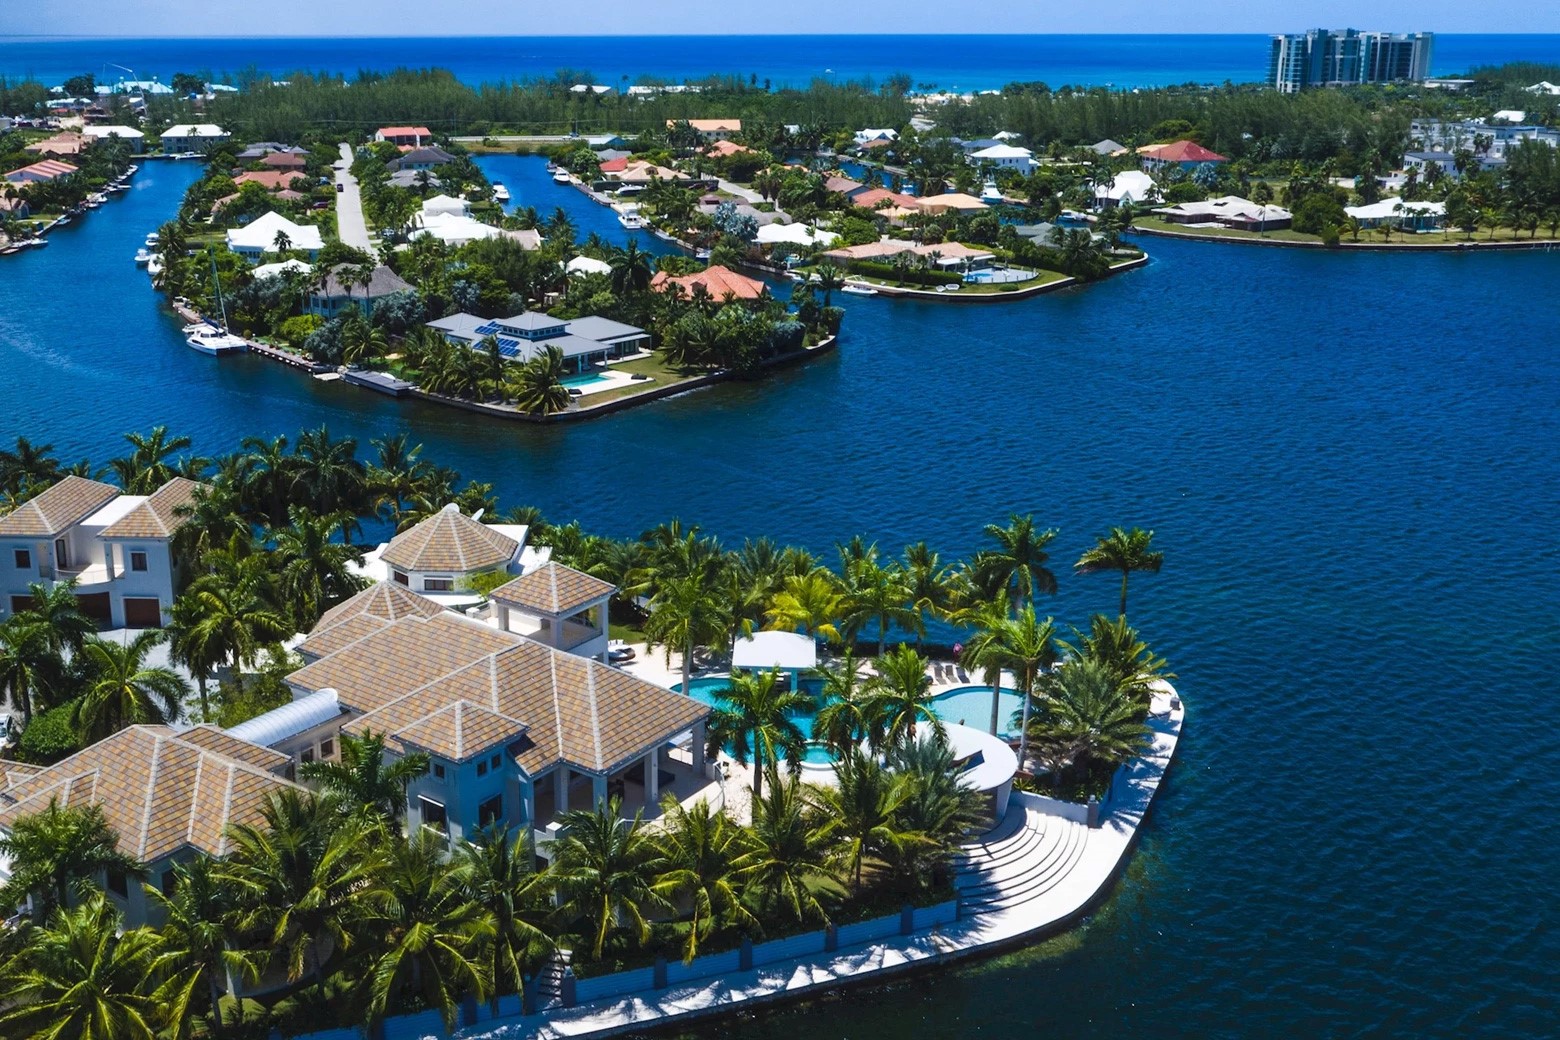 Cayman Compass: Red hot property market sees record sales